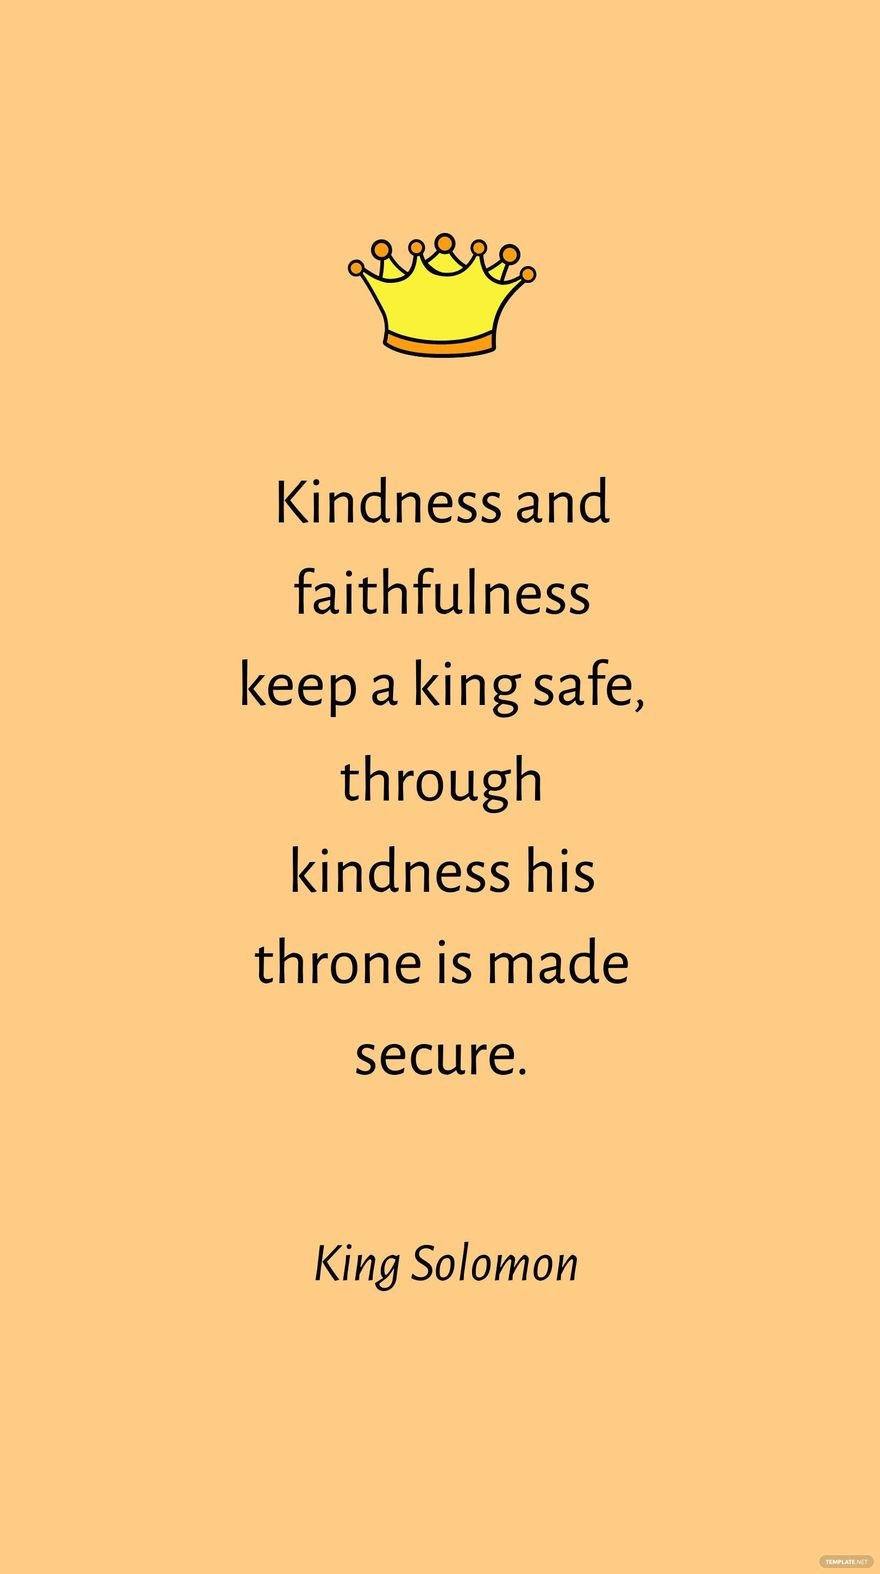 King Solomon - Kindness and faithfulness keep a king safe, through kindness his throne is made secure.